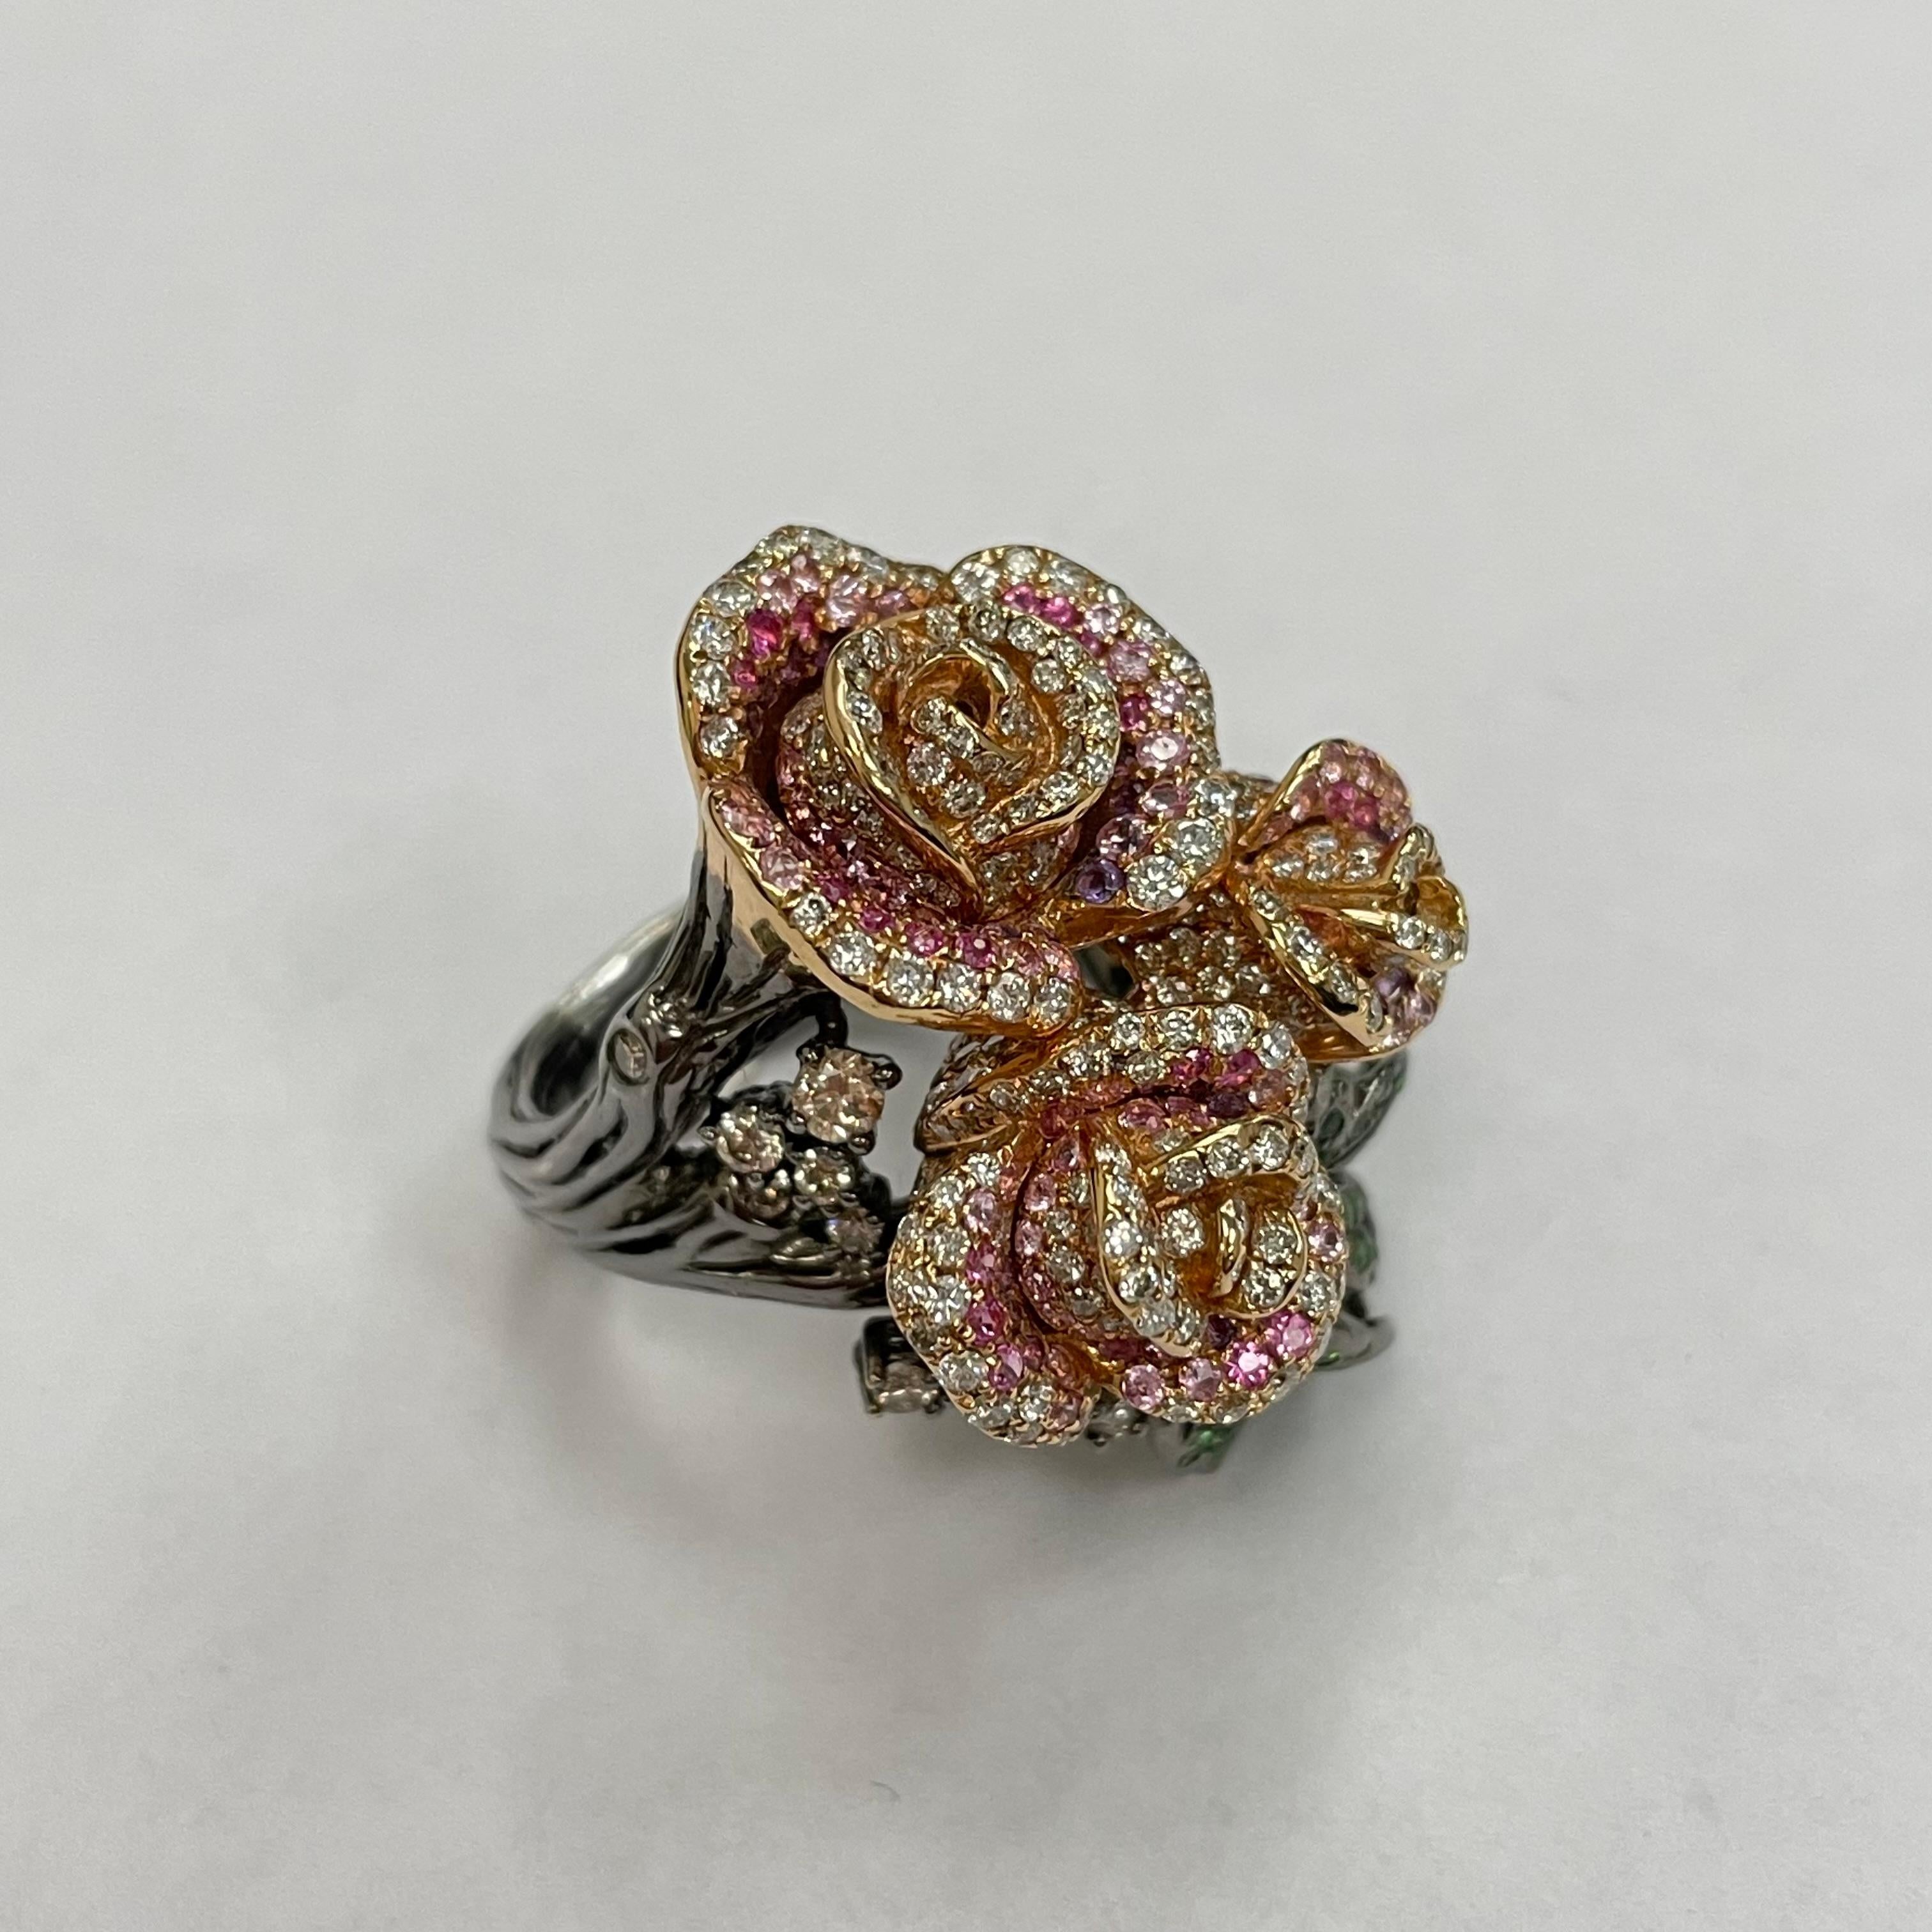 A stunning and stylish three-dimensional rose ring, set with brillant-cut of diamond , brown diamond, tsavorite, pink sapphire and amethyst. Made in 18K rose and black rhodium gold.
378 pieces diamonds ( 3.09 carats )
18 pieces brown diamonds ( 0.58